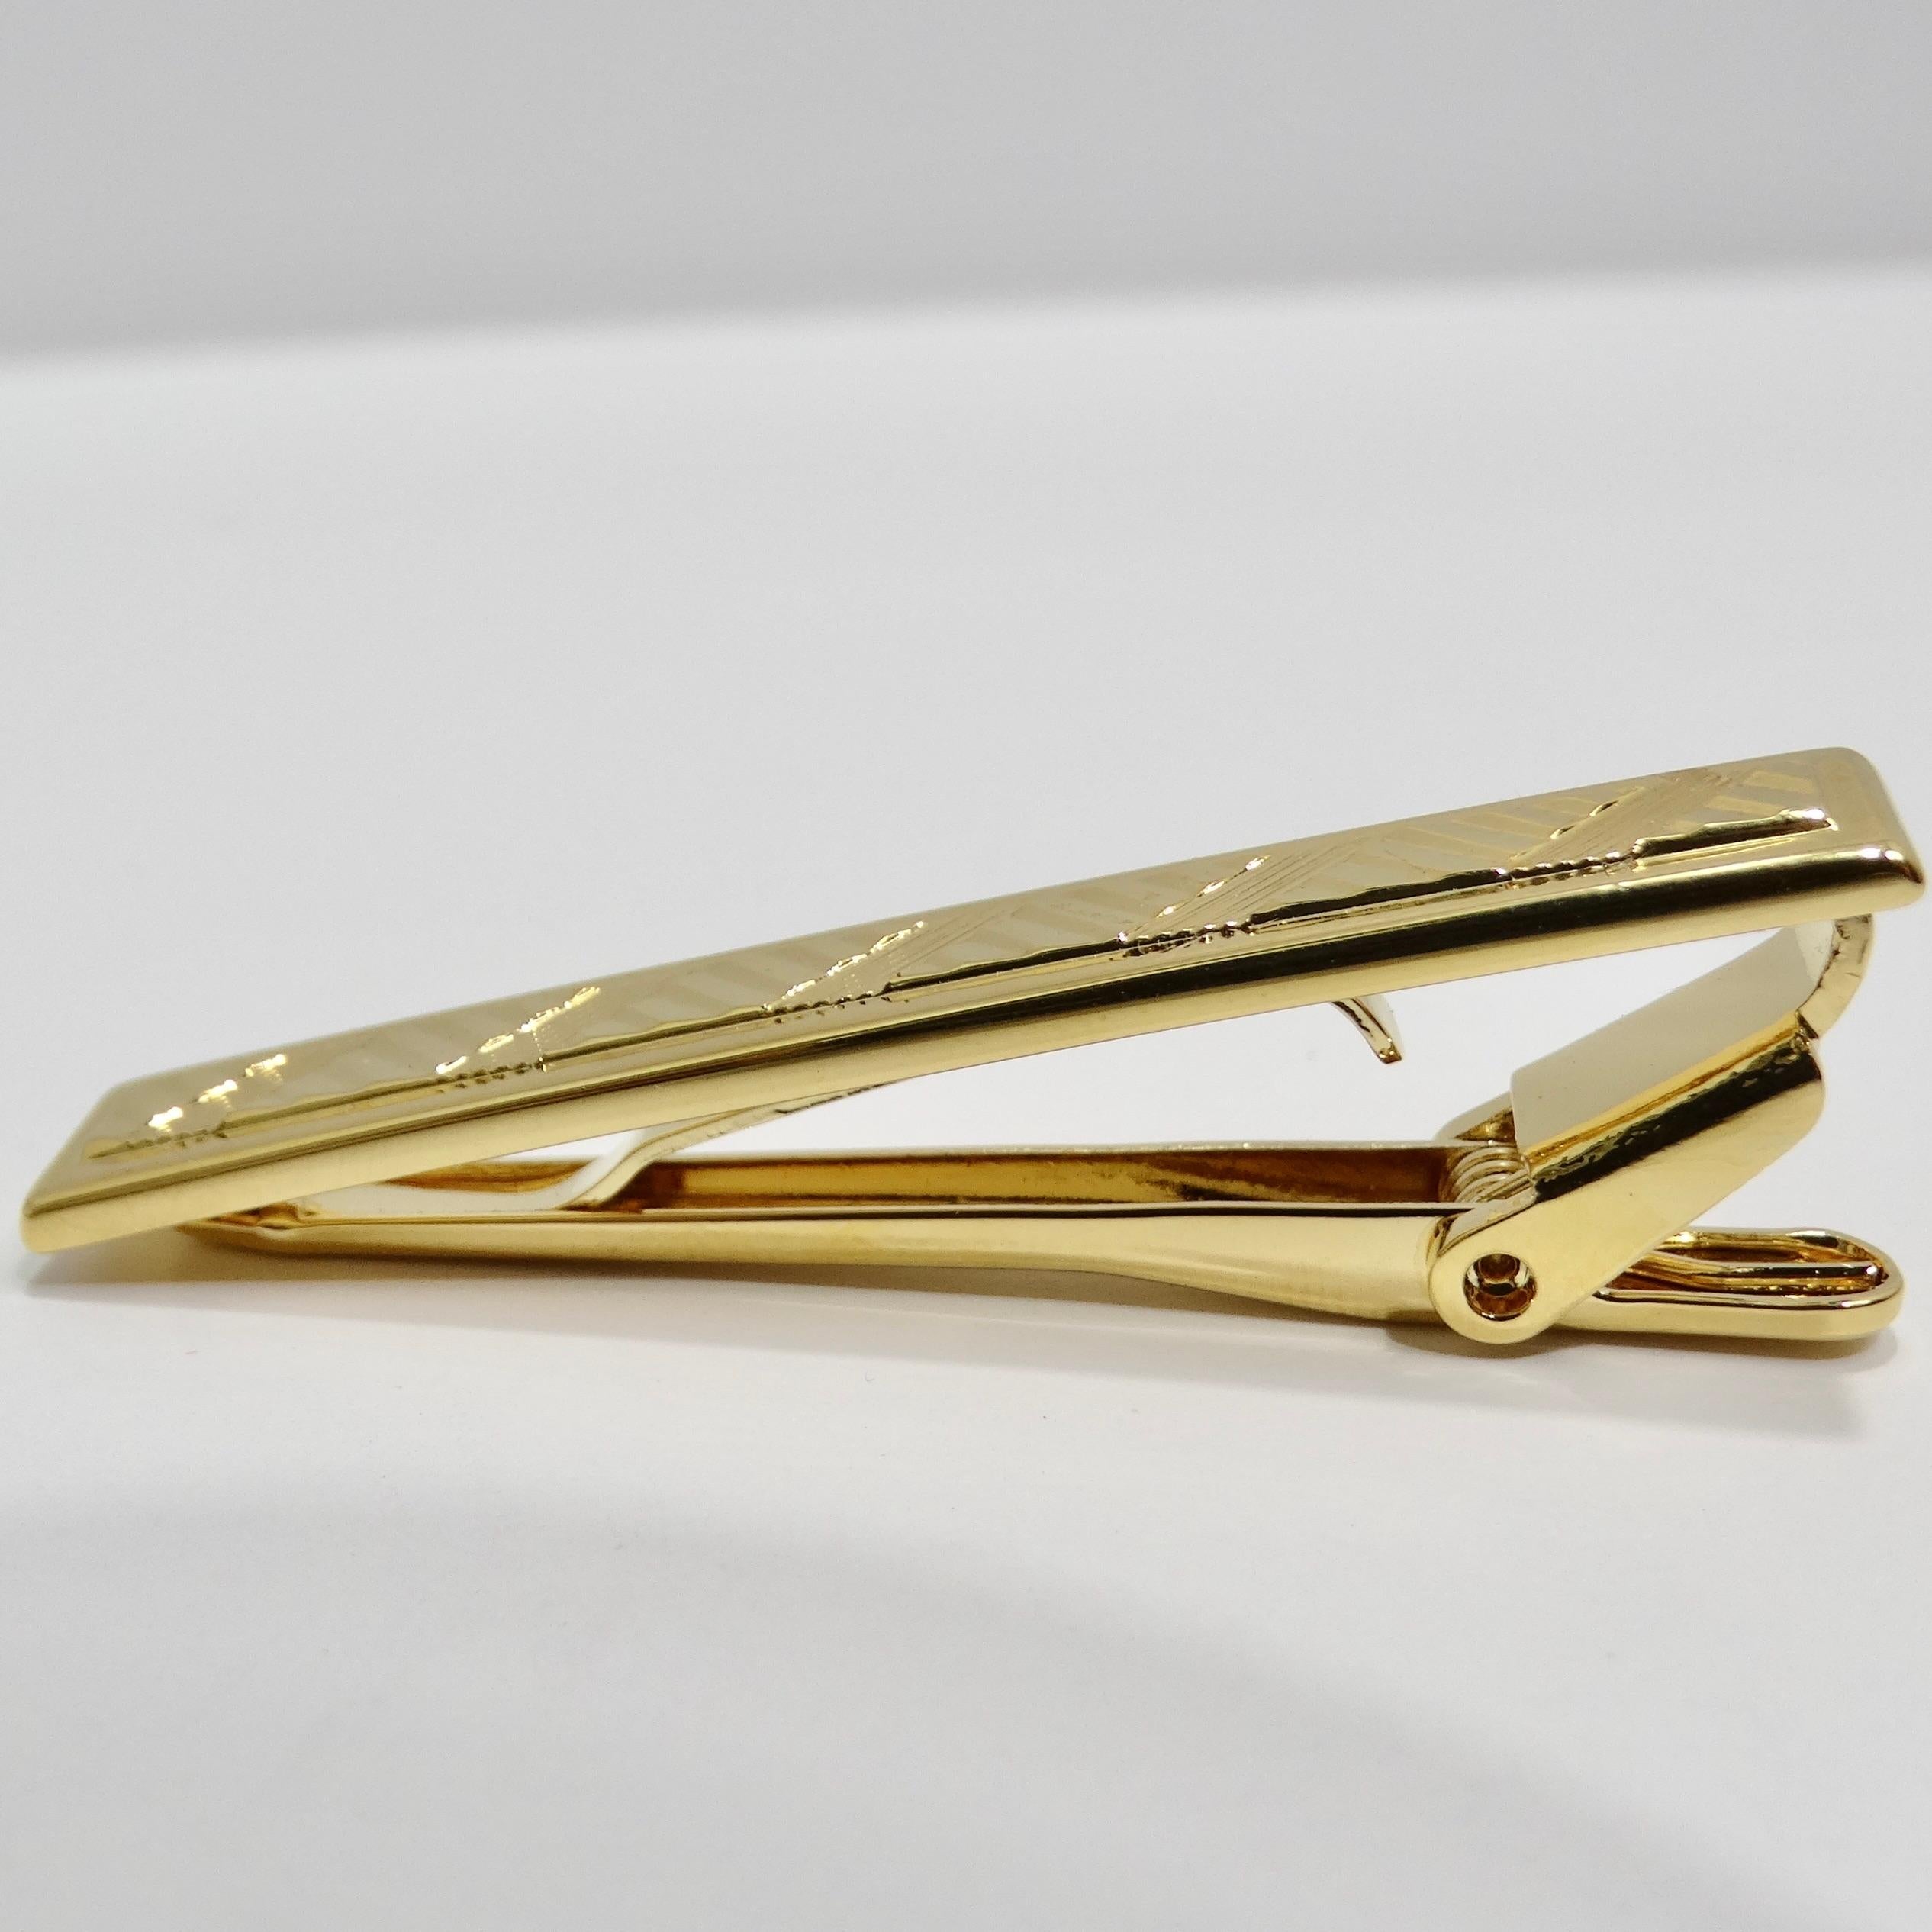 Introducing the 18K Gold Plated 1980d Tie Clip, a classic vintage piece that adds a touch of luxury and sophistication to any formal look. This tie clip is crafted with 18k yellow gold plating, offering a warm and lustrous finish that exudes